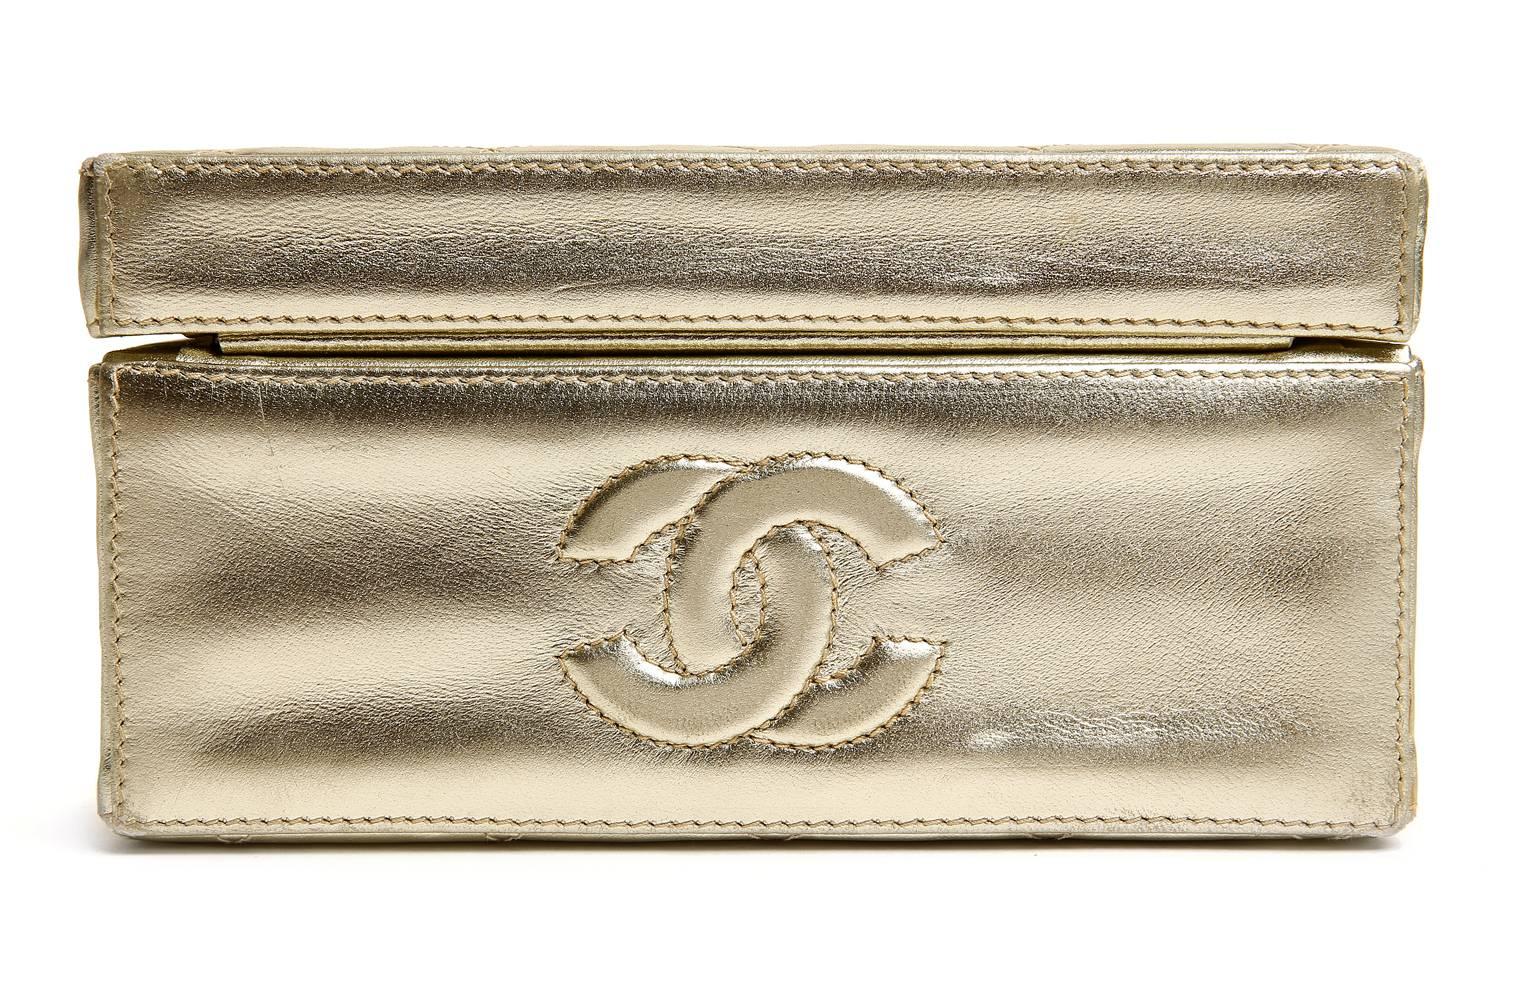 Chanel Platinum Quilted Leather Box Bag In Excellent Condition For Sale In Malibu, CA